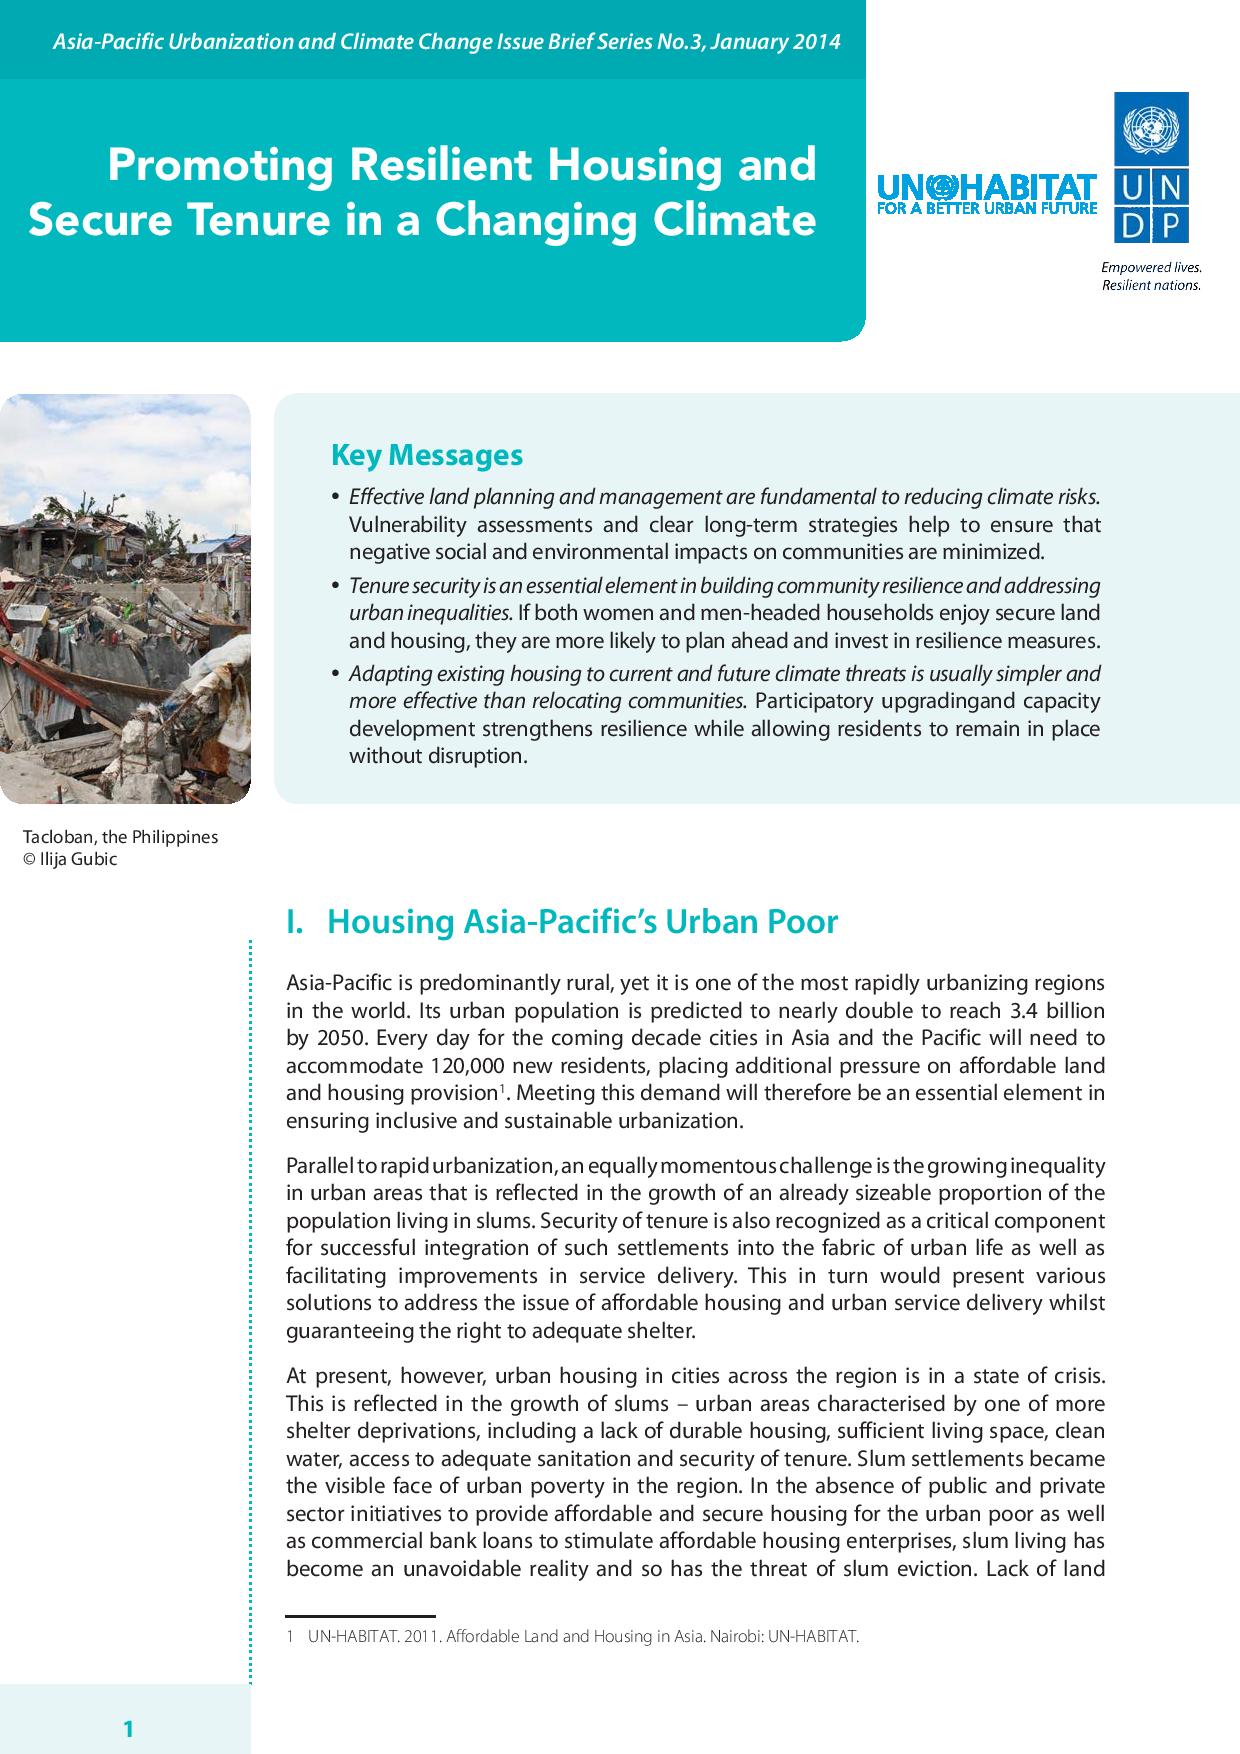 No. 3: The Asia-Pacific Issue Brief Series on Urbanization and Climate Change (January 2014)